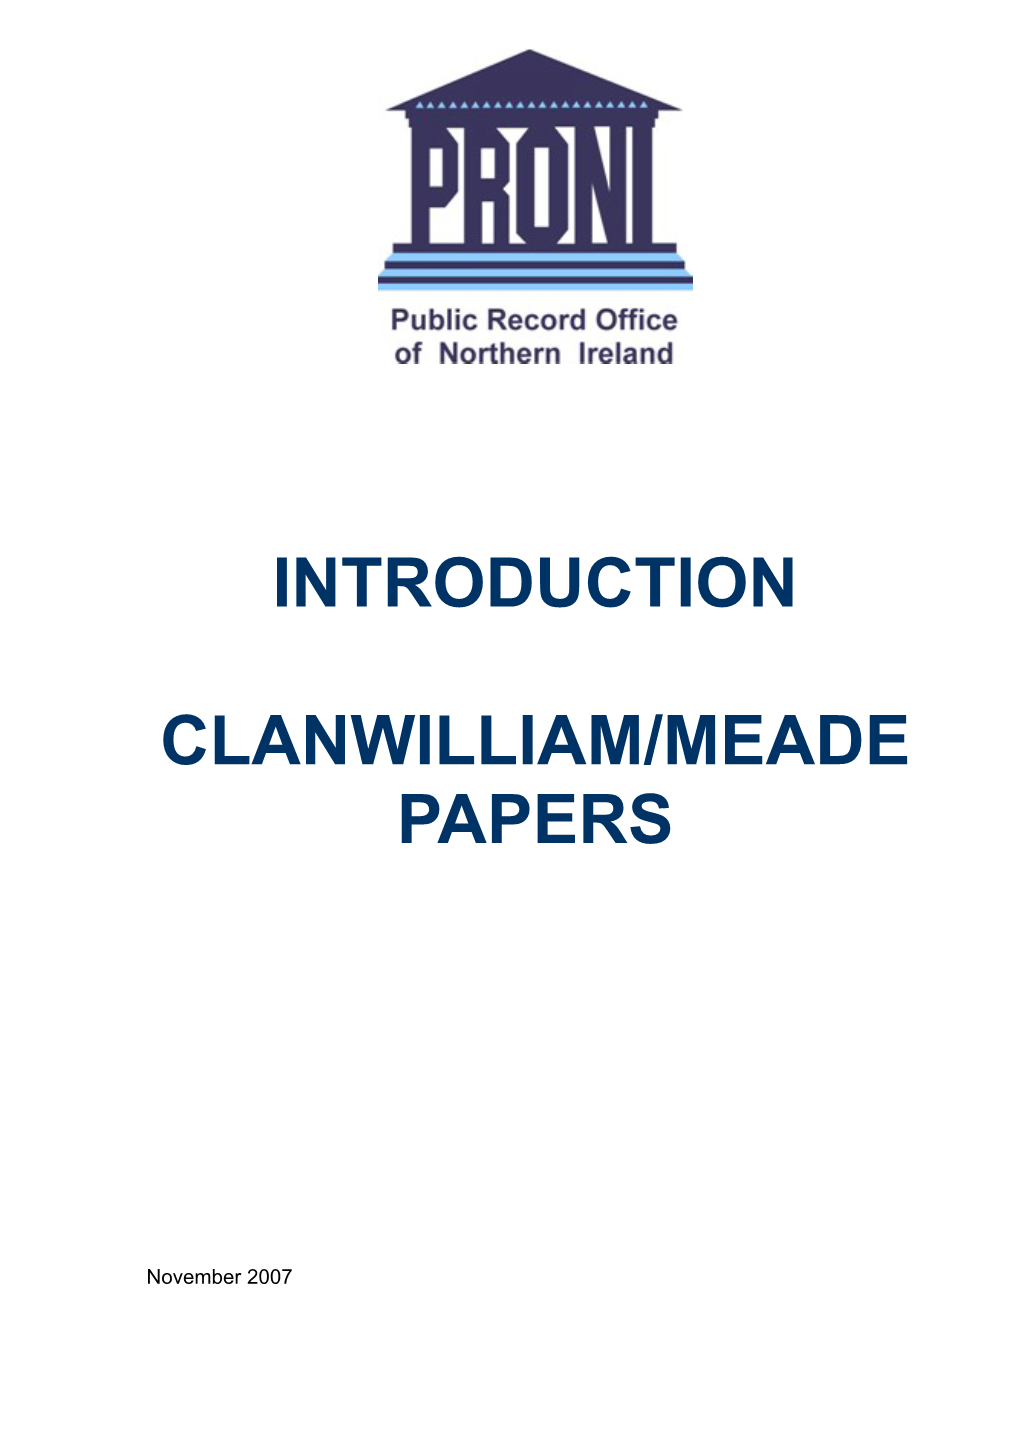 Introduction to the Clanwilliam/Meade Papers